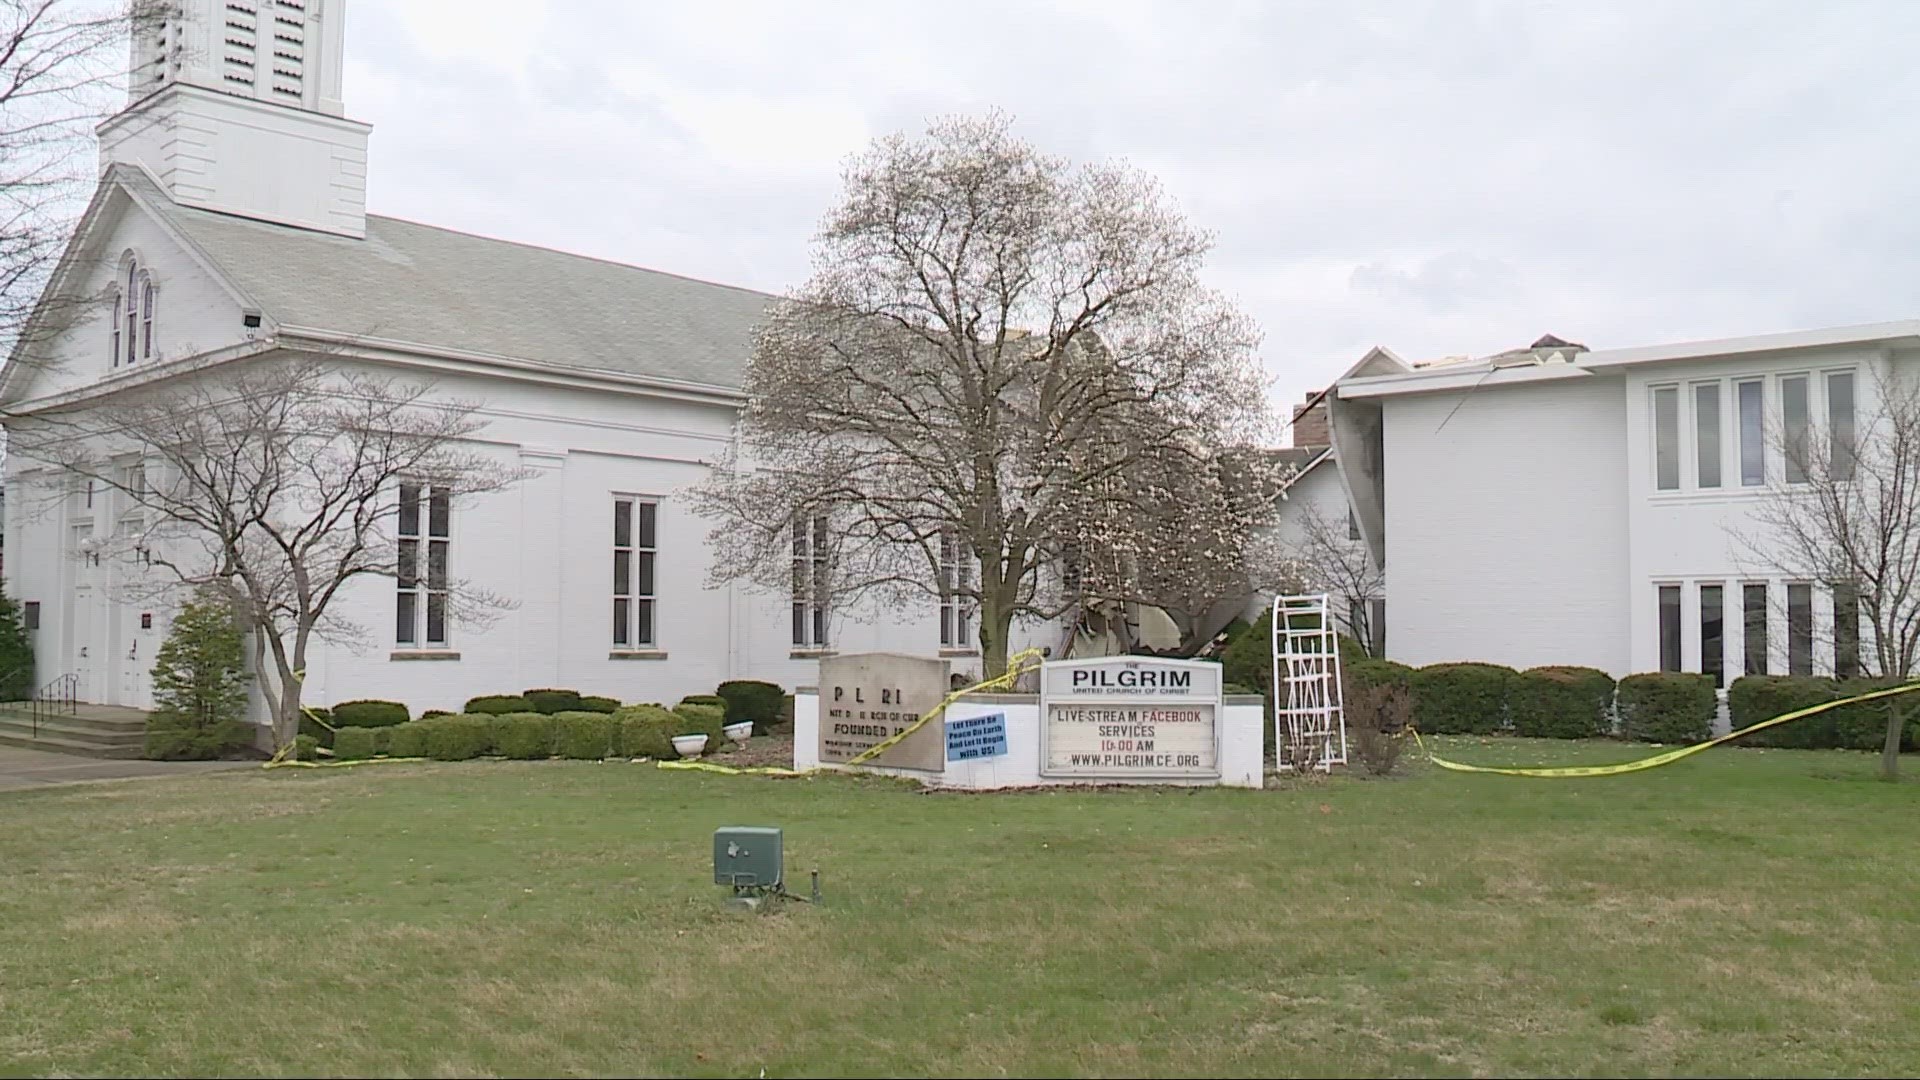 Cuyahoga Falls Pilgrim United Church of Chris was heavily damaged during Saturday's storms.